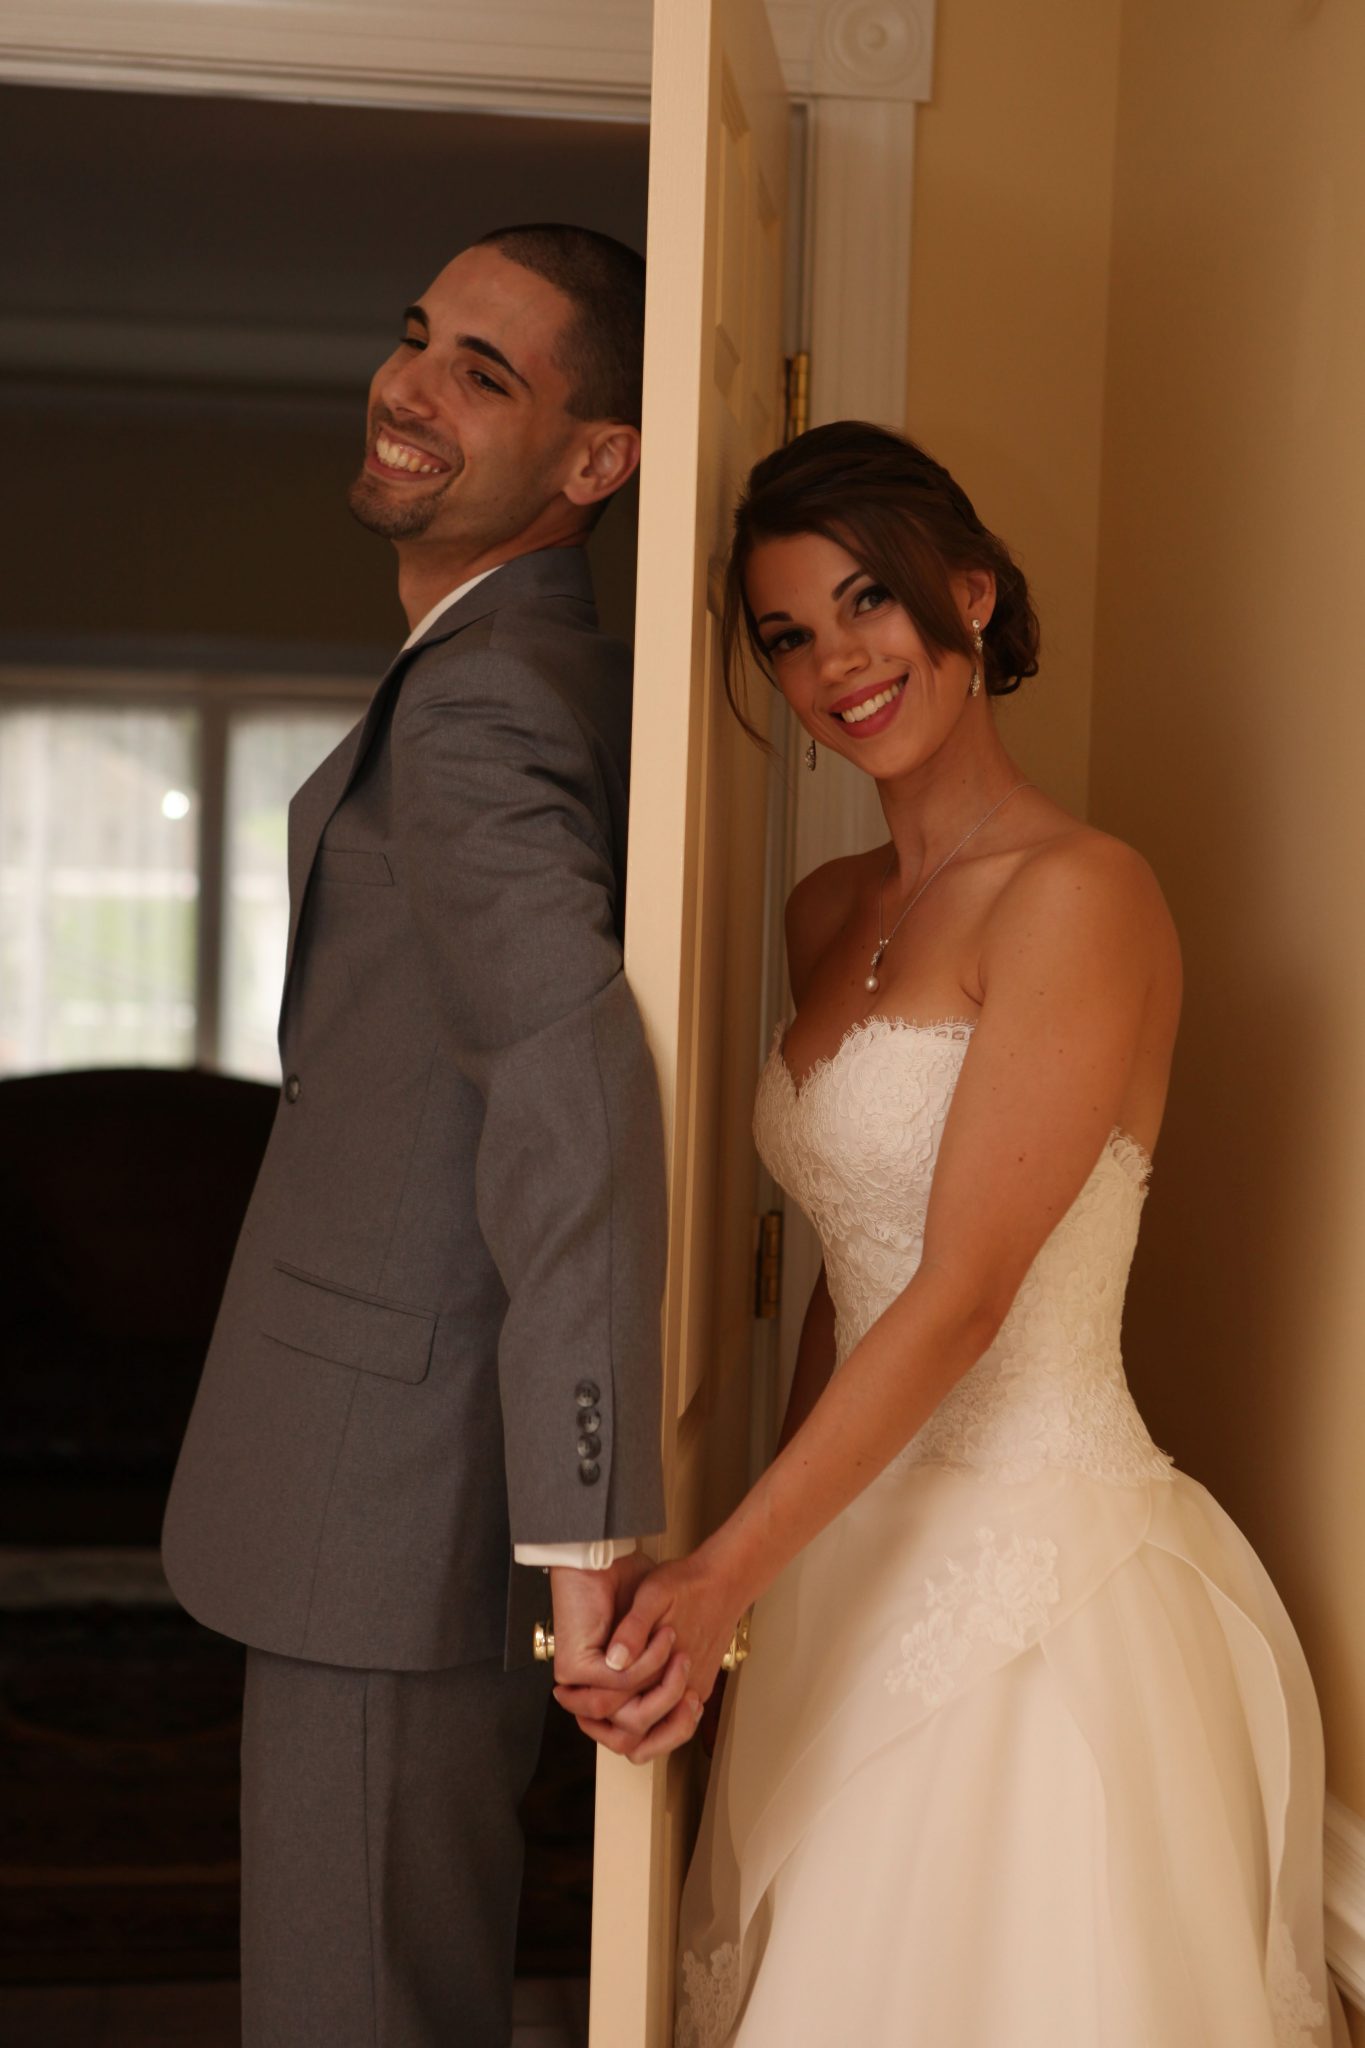 Bride and groom stay on opposite sides of door before wedding ceremony in this fun photo.